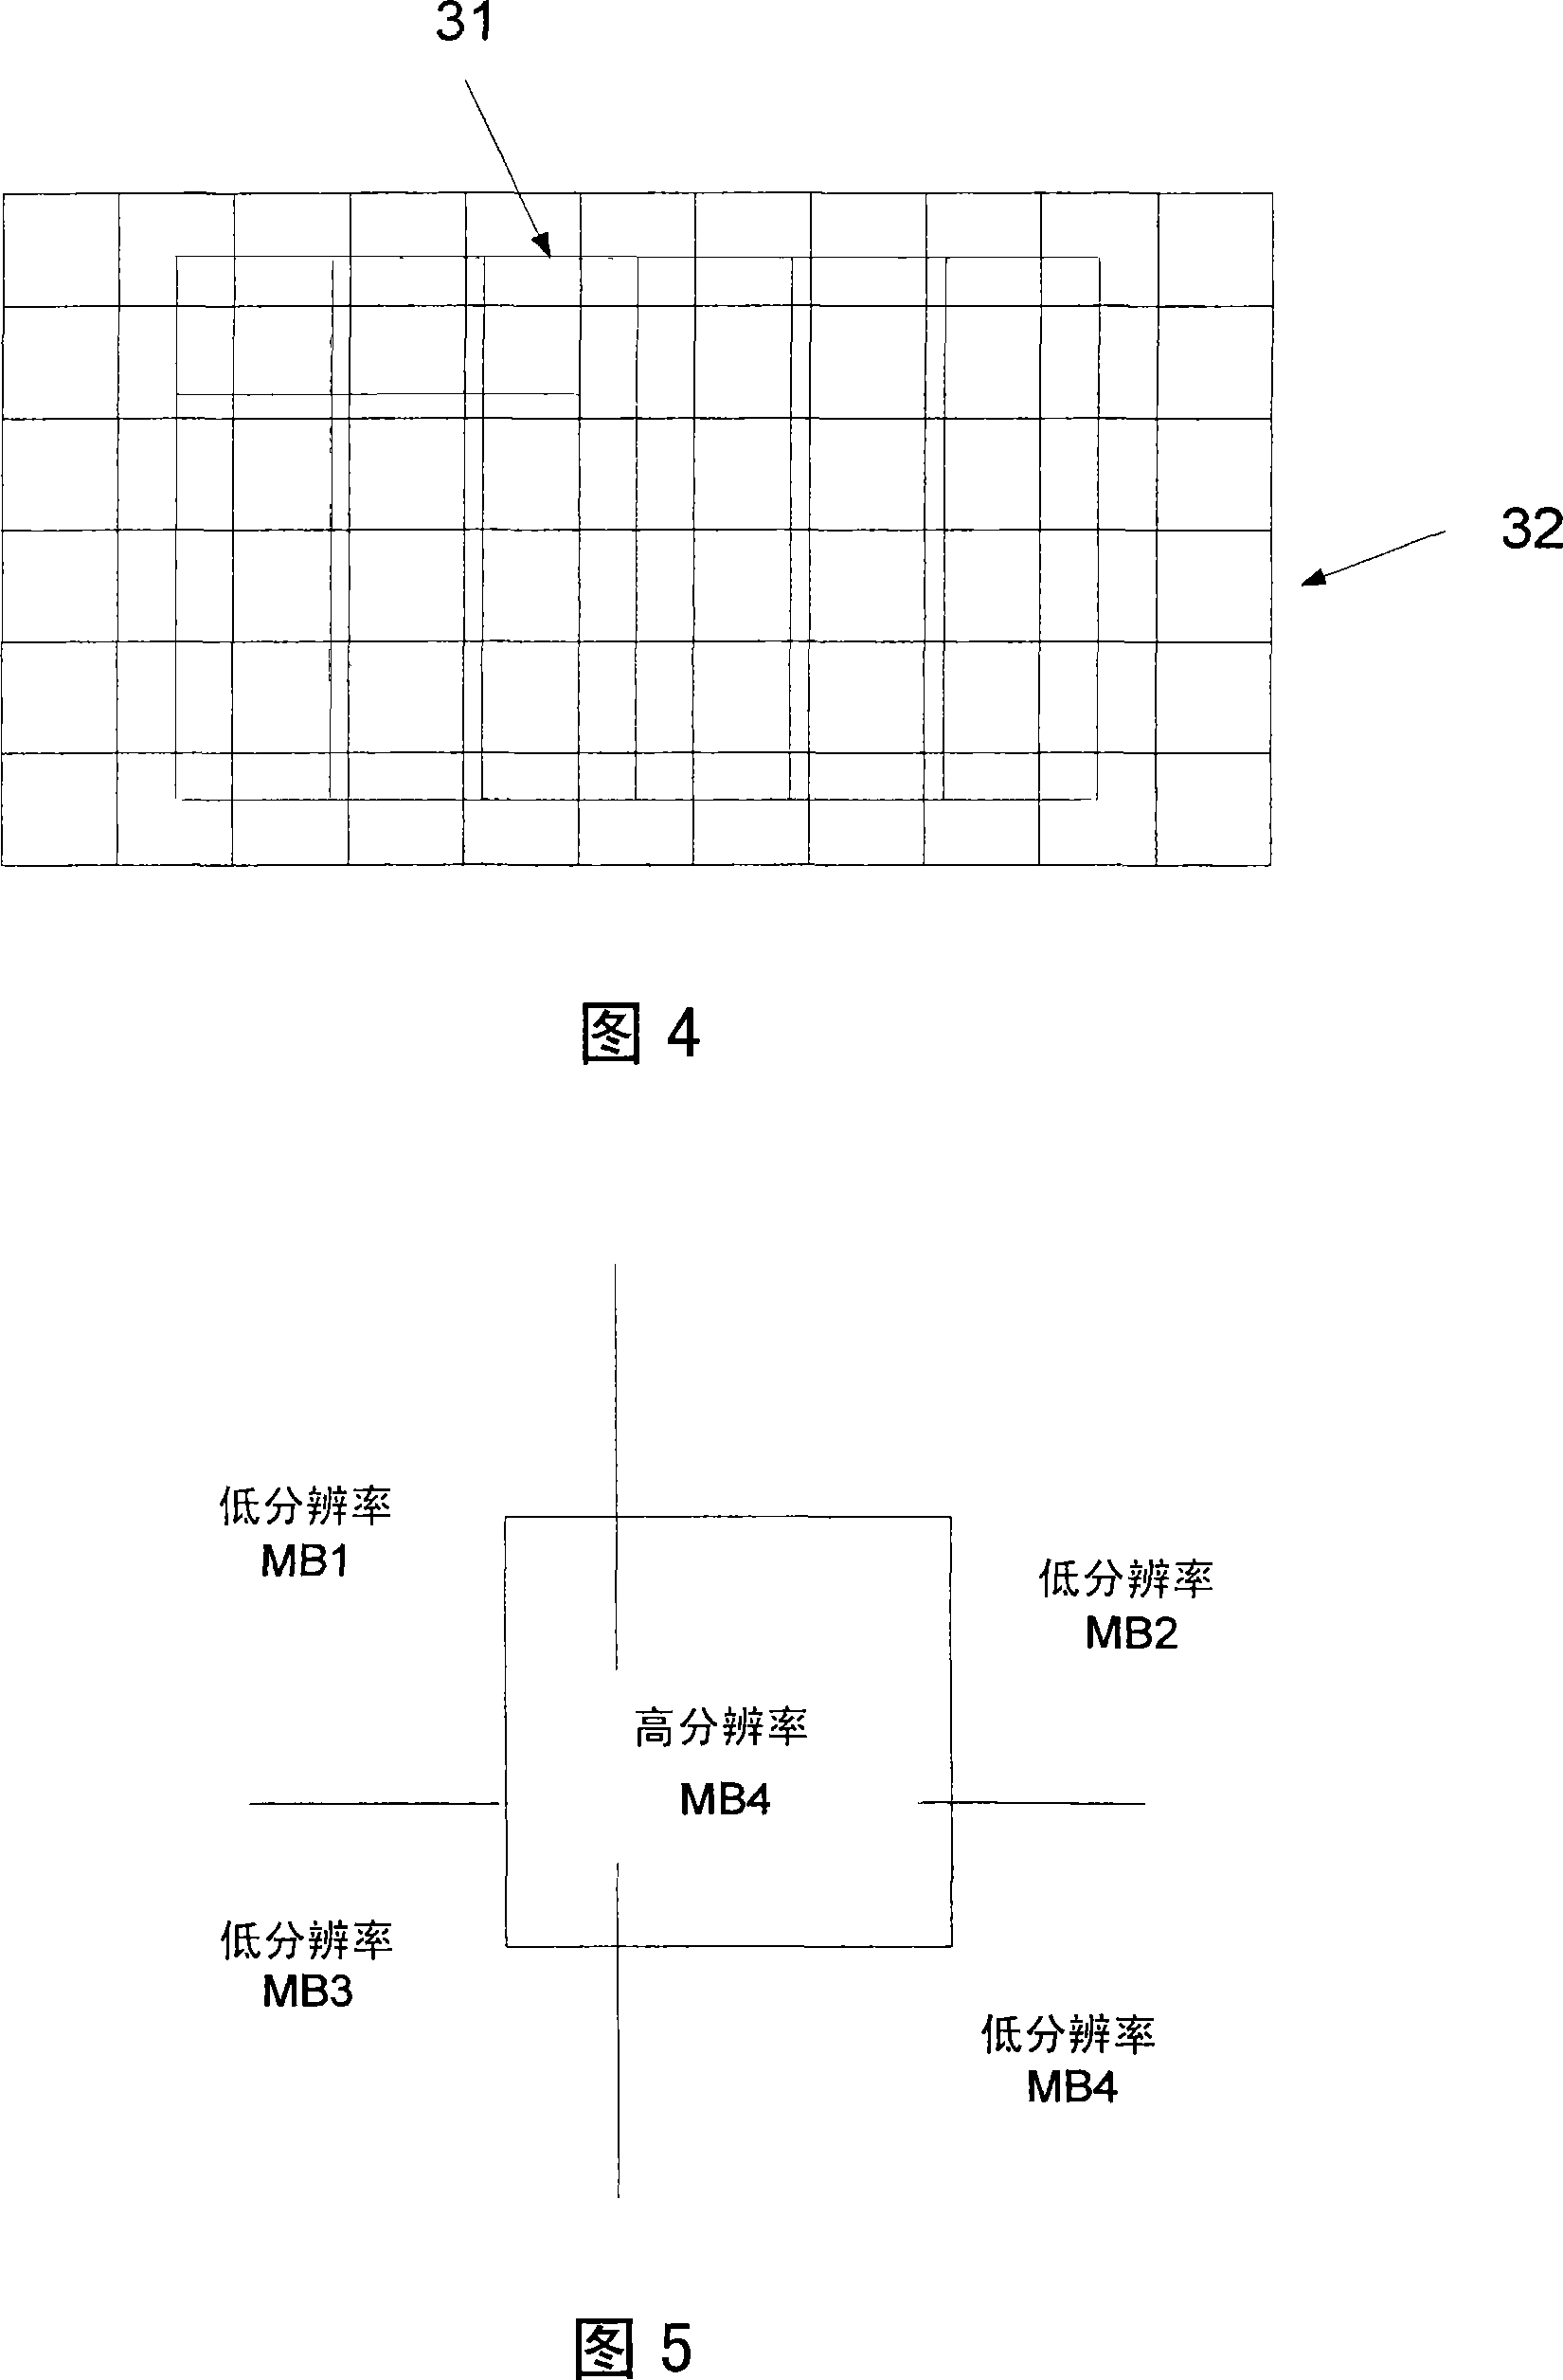 Method for scalable video coding